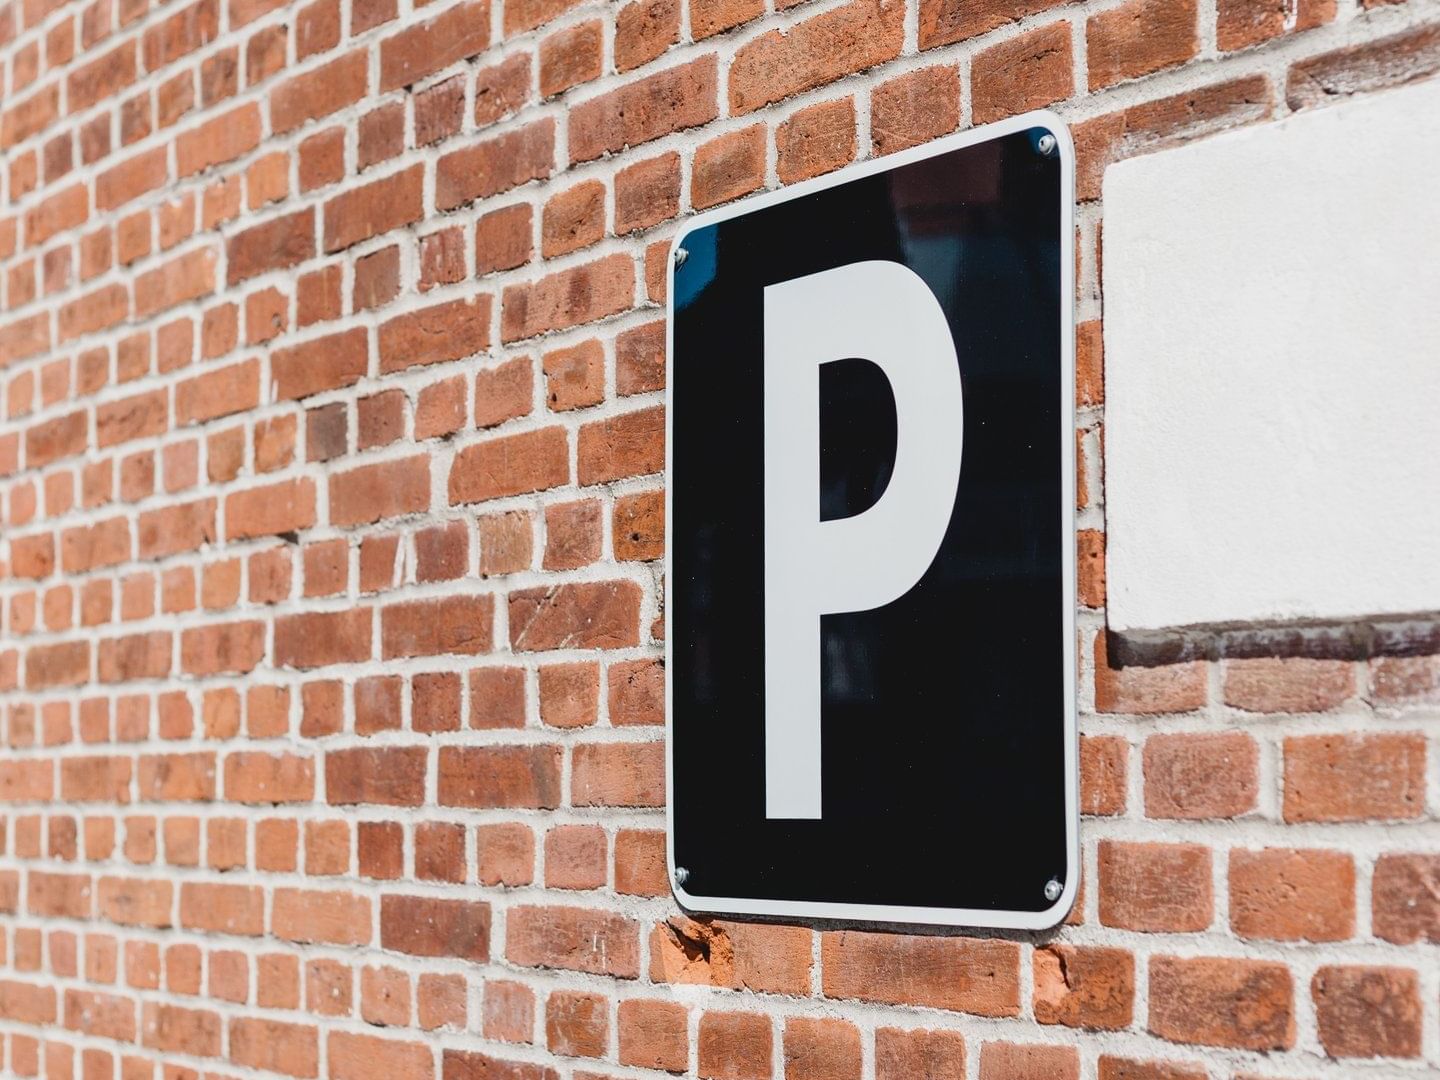 Parking sign at New Haven Hotel